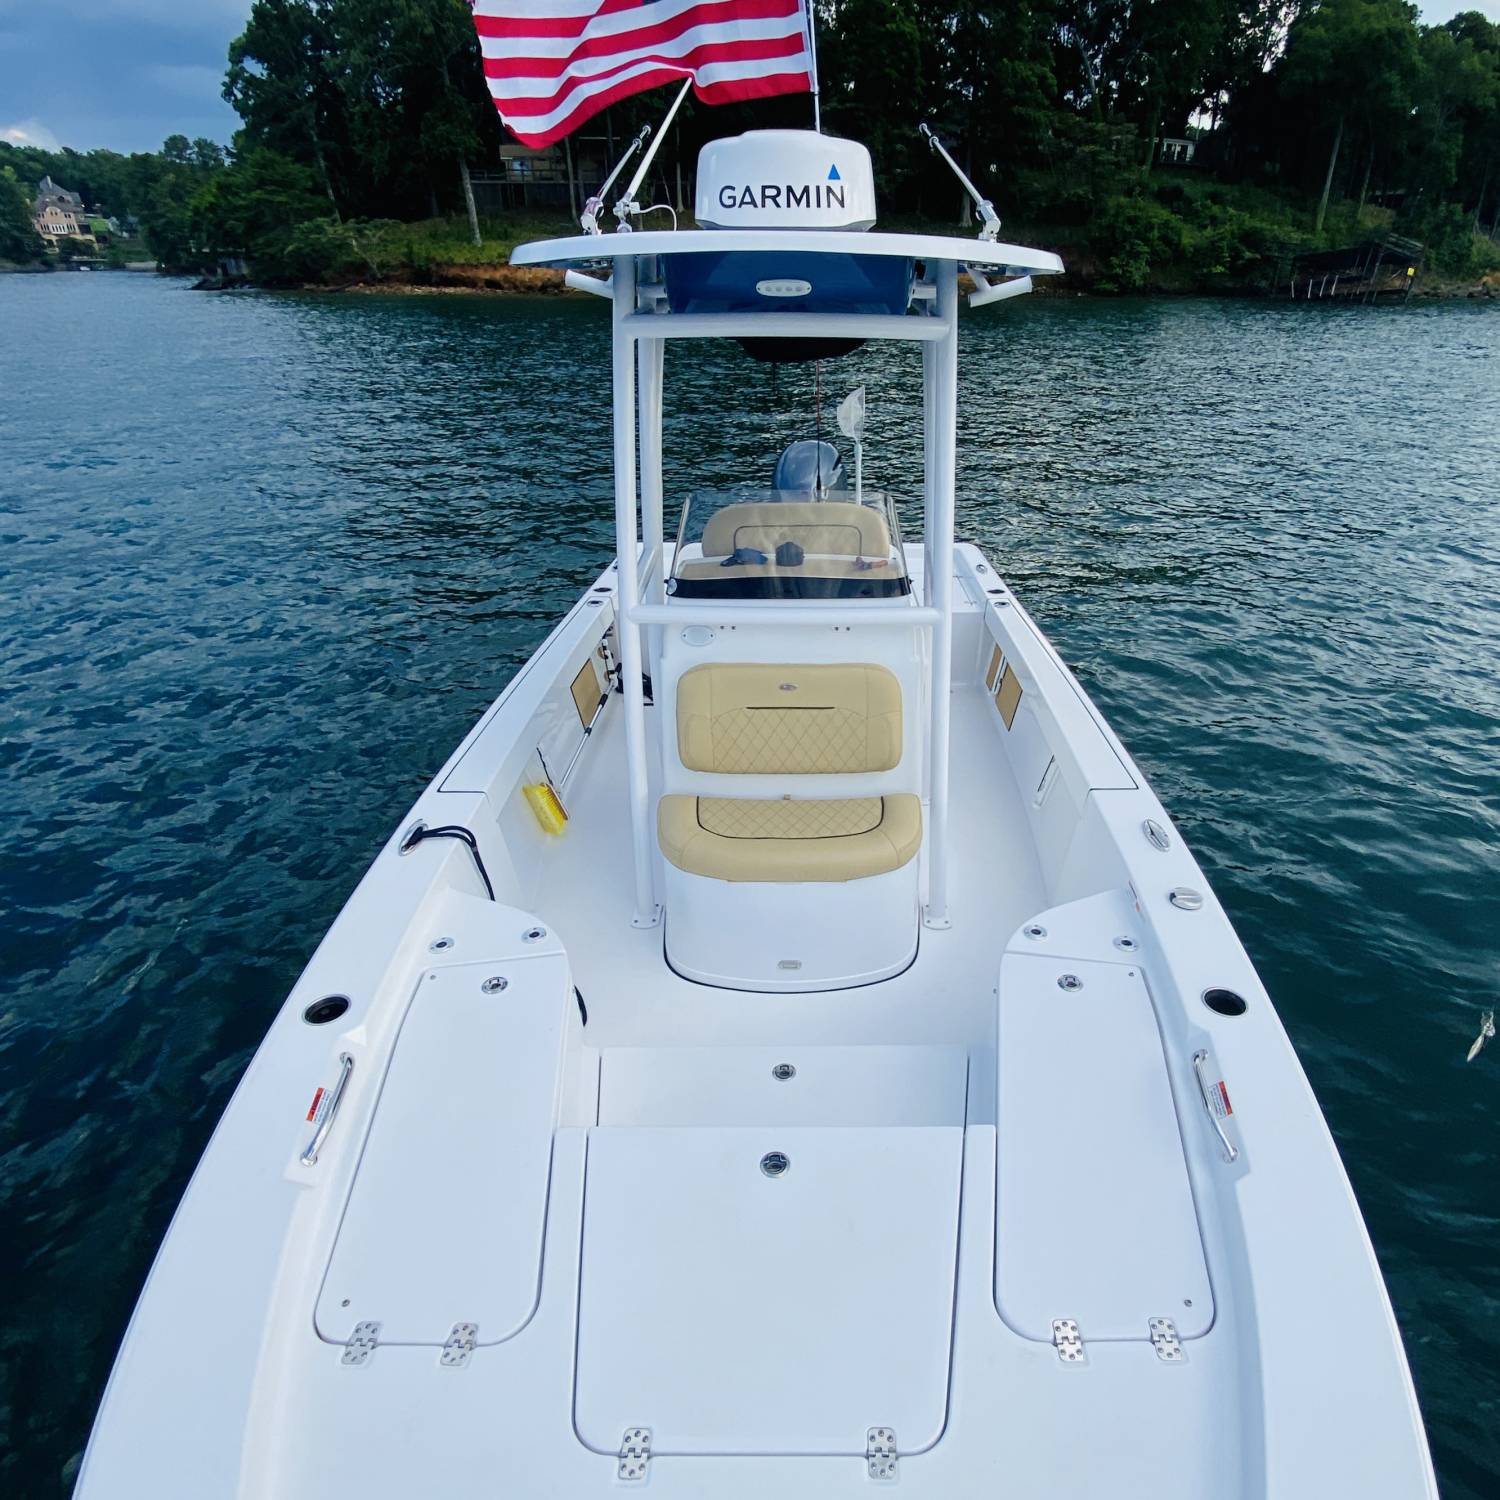 Title: 4th of July pic - Merica - On board their Sportsman Masters 227 Bay Boat - Location: Lake Lanier. Participating in the Photo Contest #SportsmanJuly